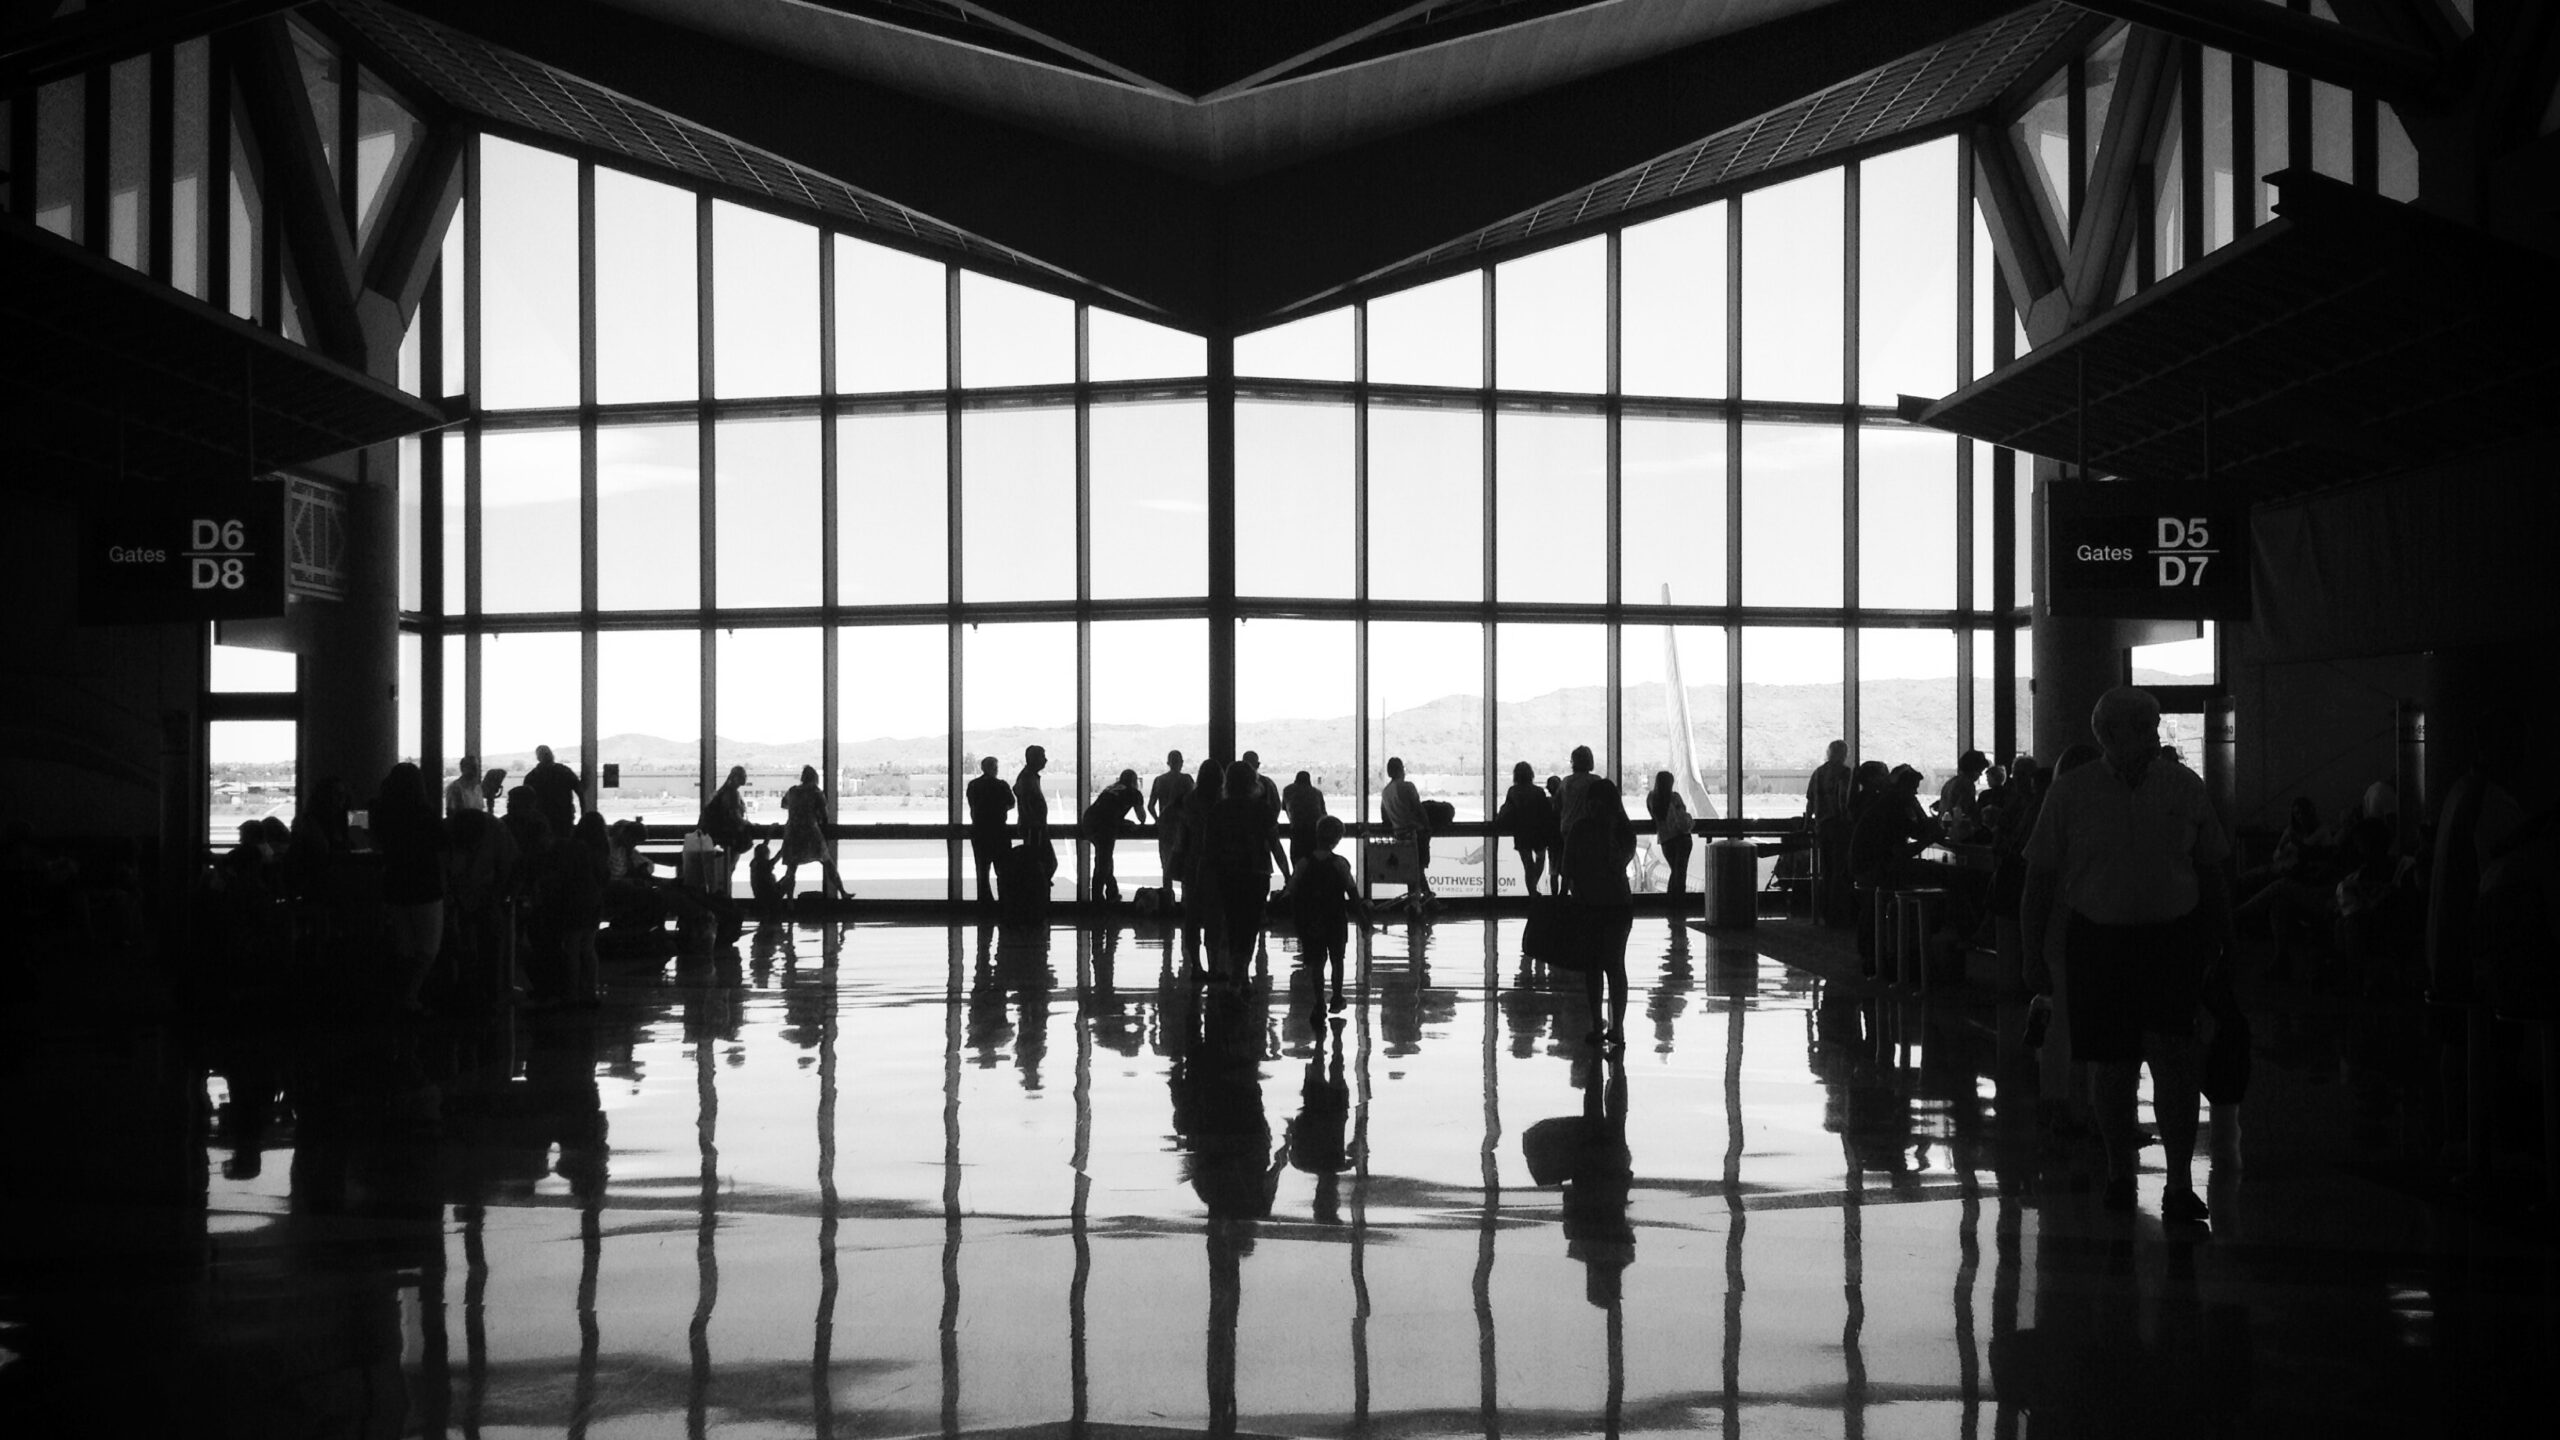 A group of people silhouetted against the window of an airline terminal.